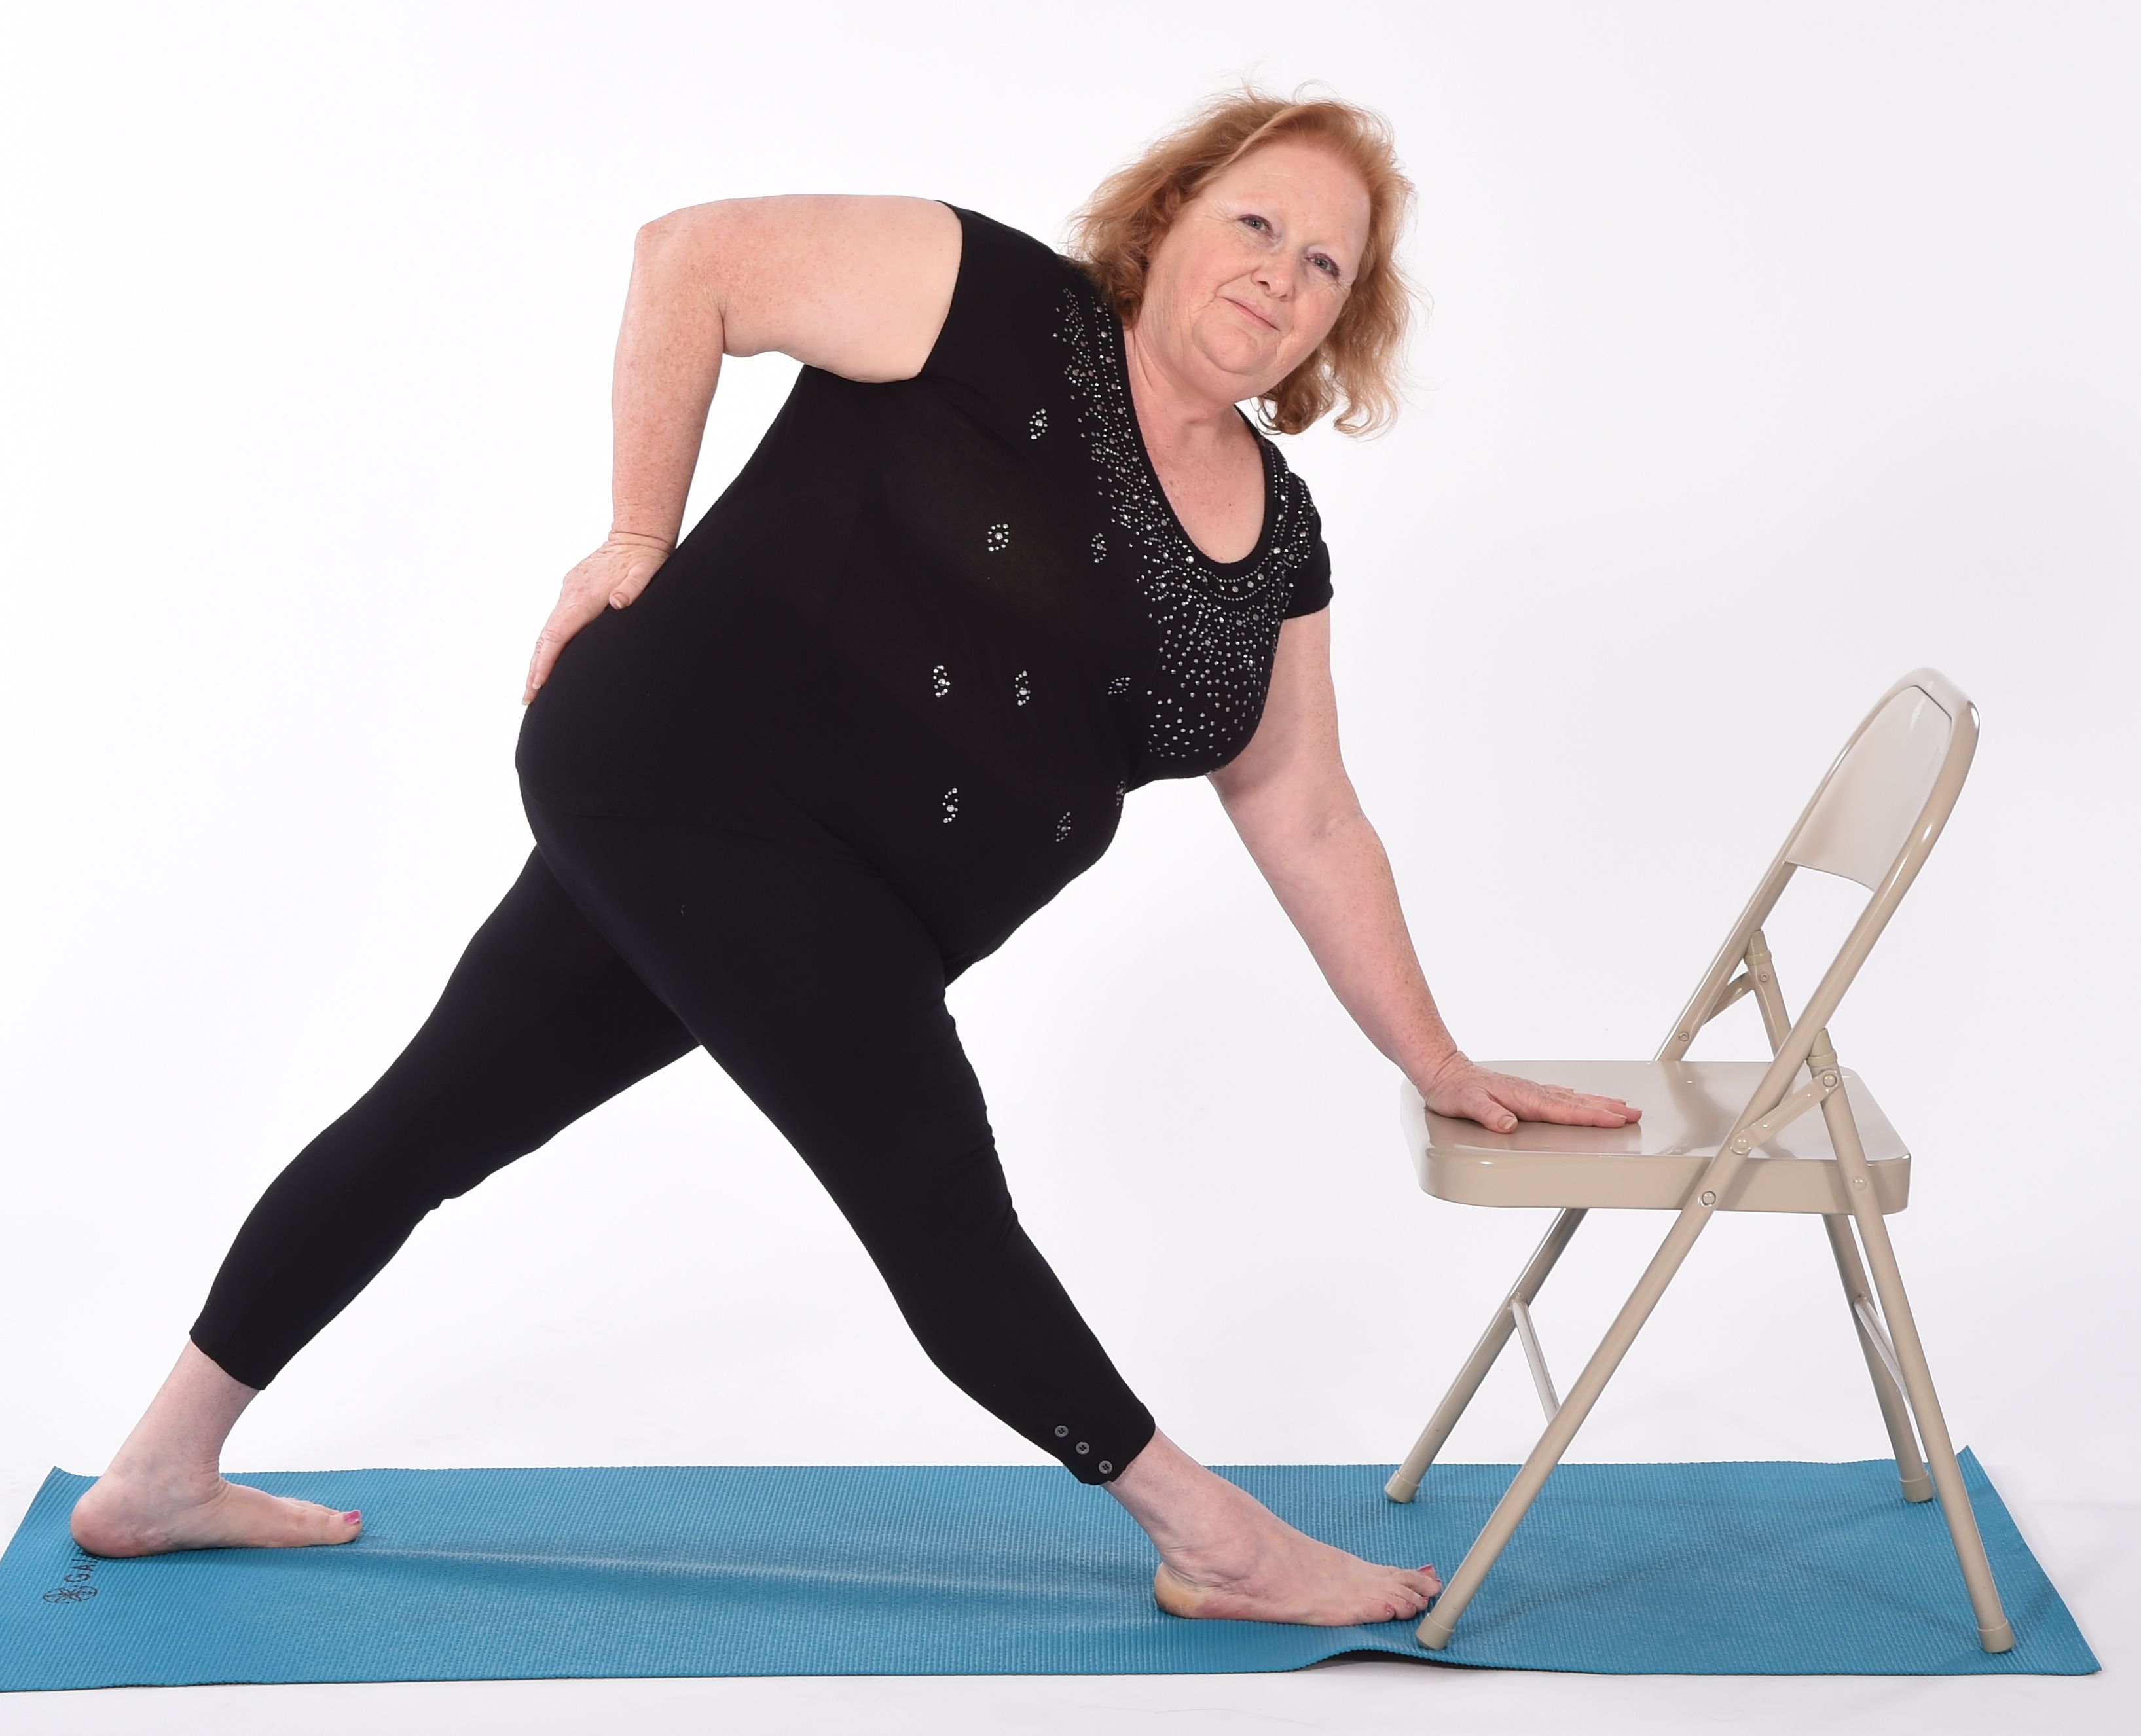 Overweight and Obese Yoga Practitioners have a Higher Quality of Life